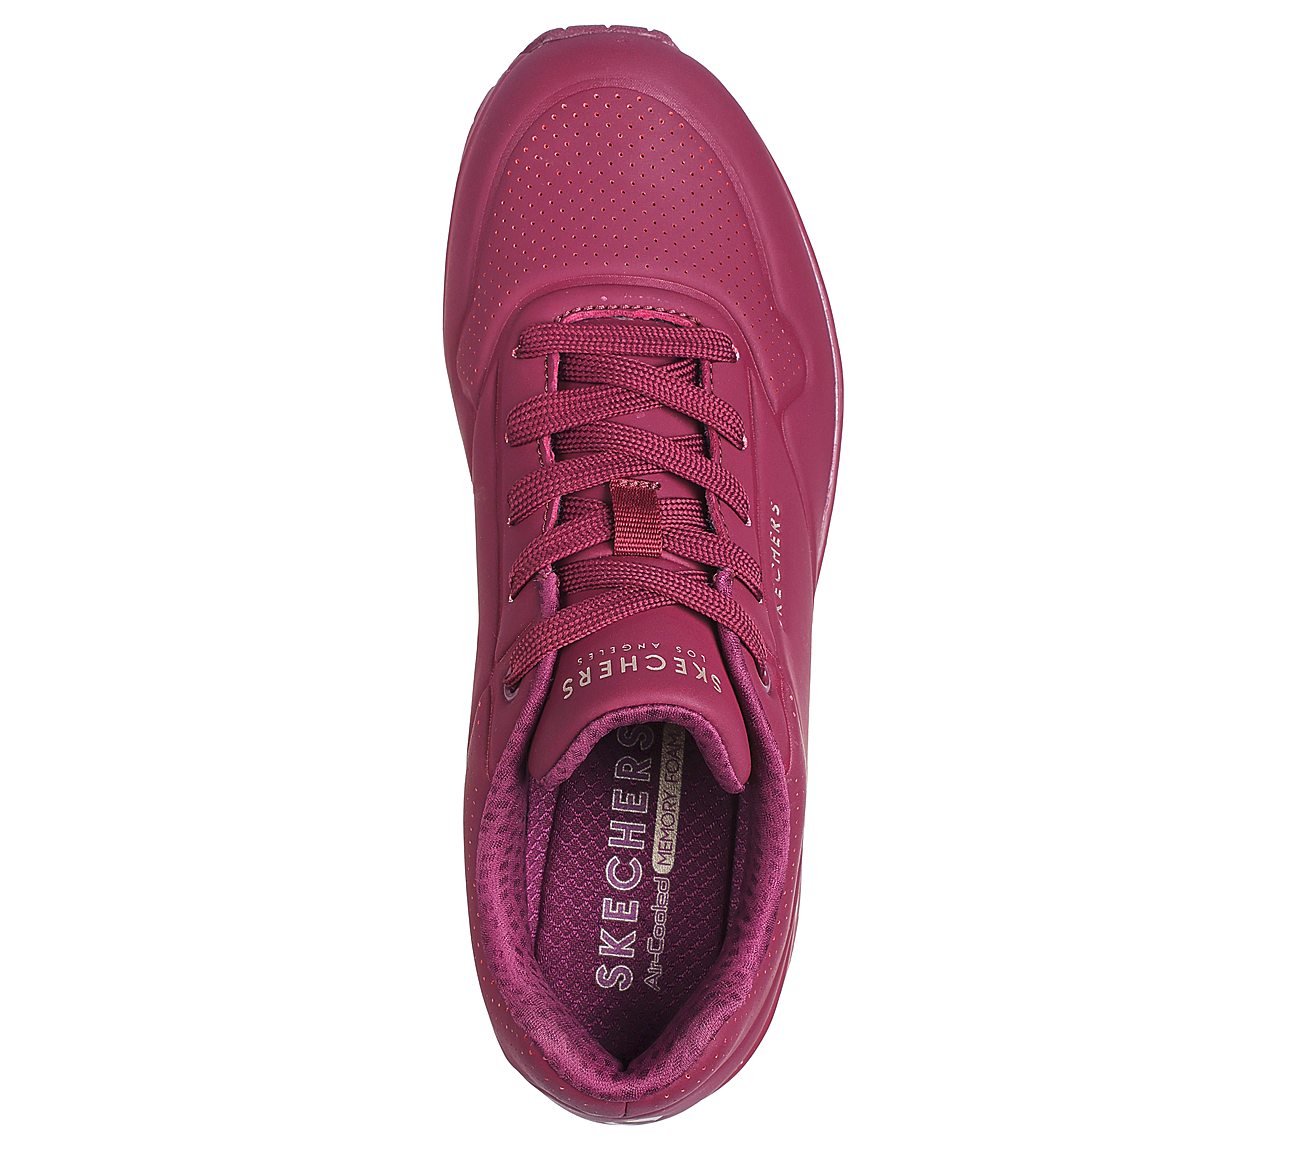 UNO - STAND ON AIR, PLUM Footwear Top View